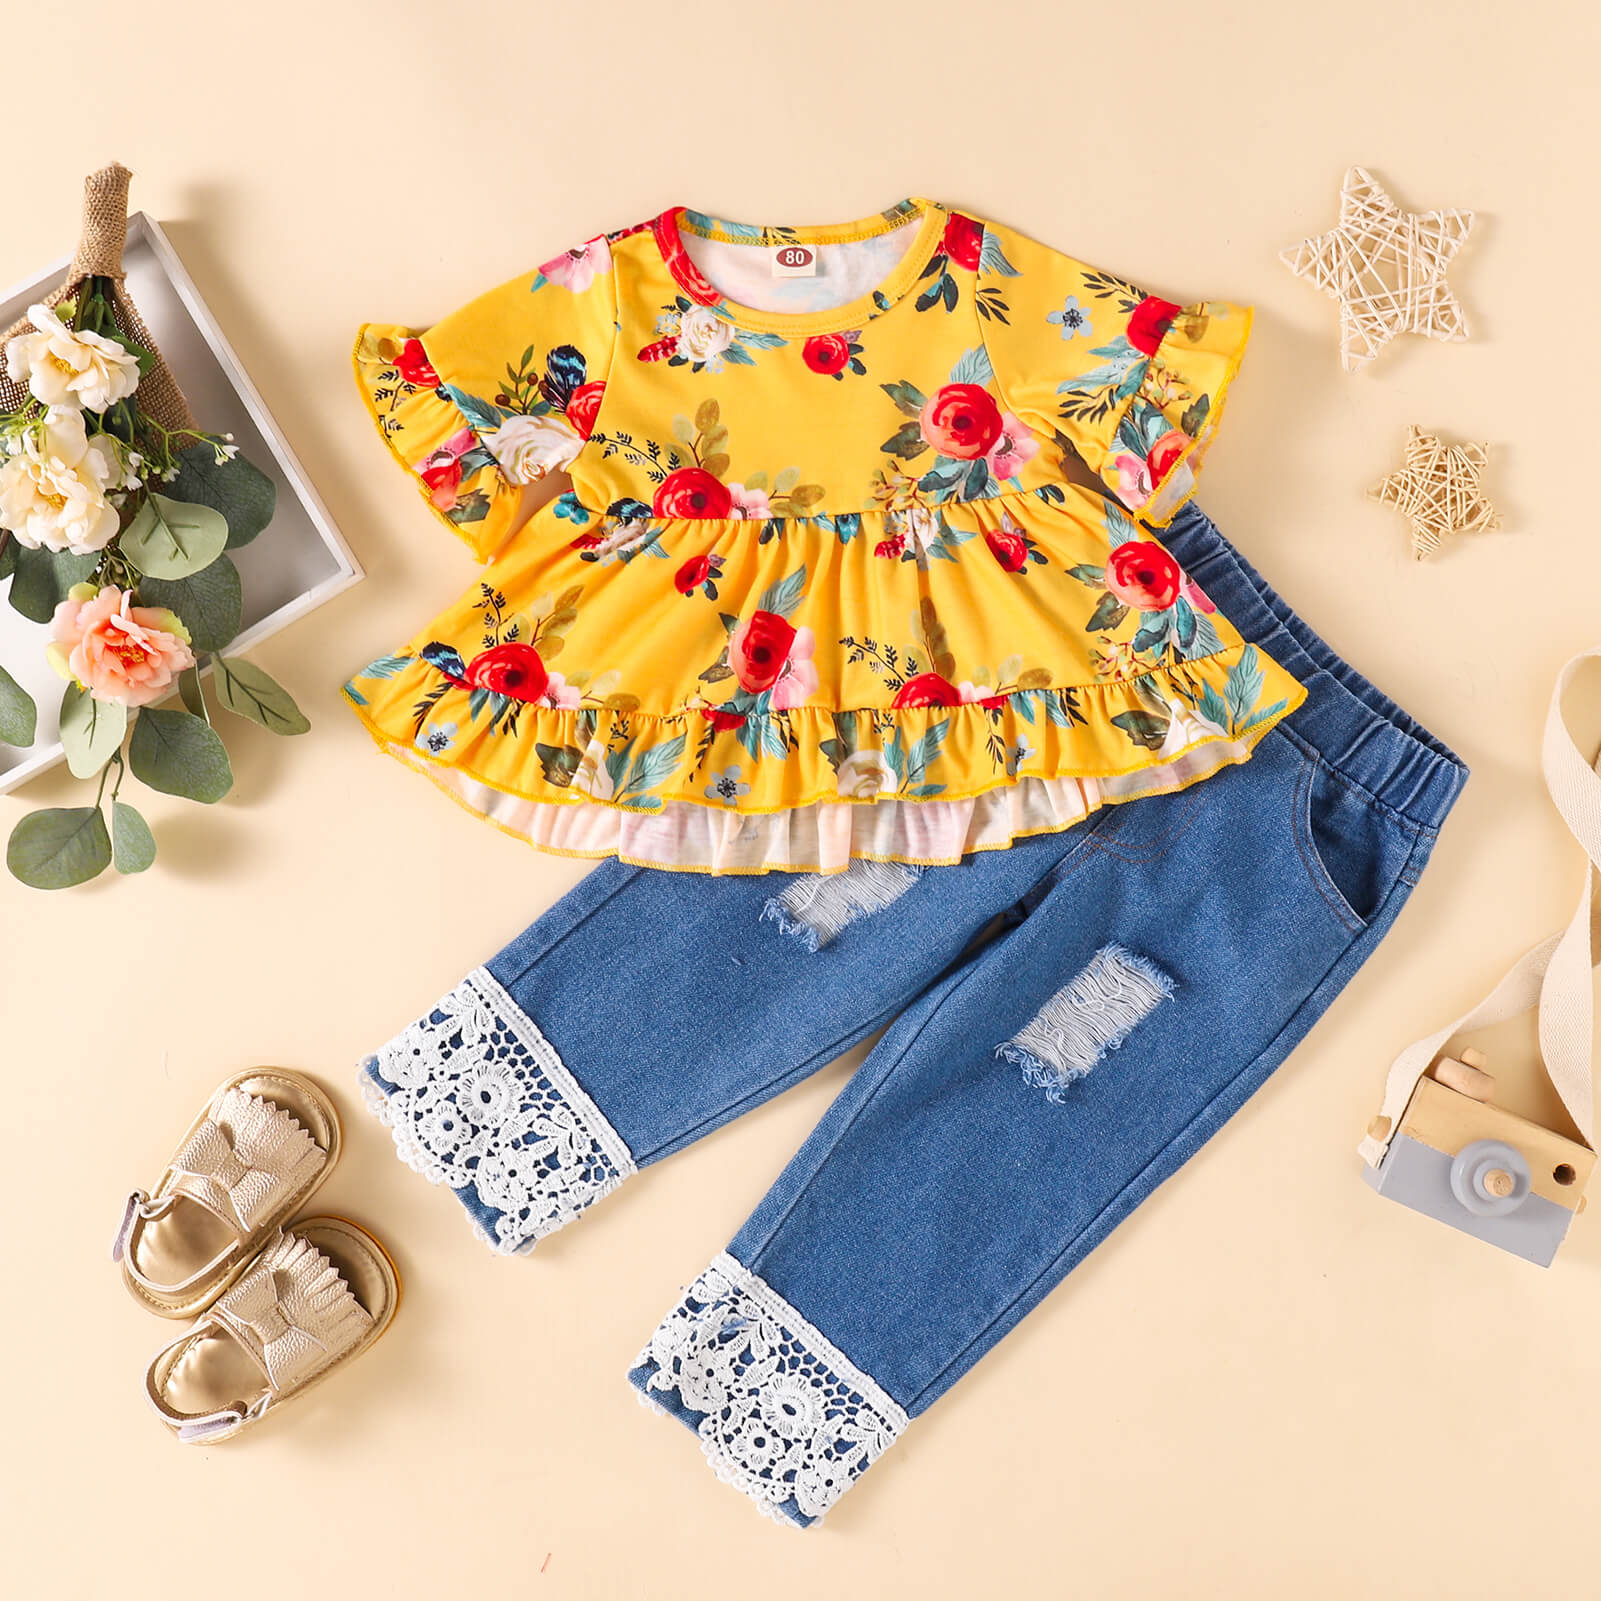 MUSTARD - Girls Floral Round Neck Top and Lace Trim Distressed Jeans Set - 3 colors - toddlers pants set at TFC&H Co.